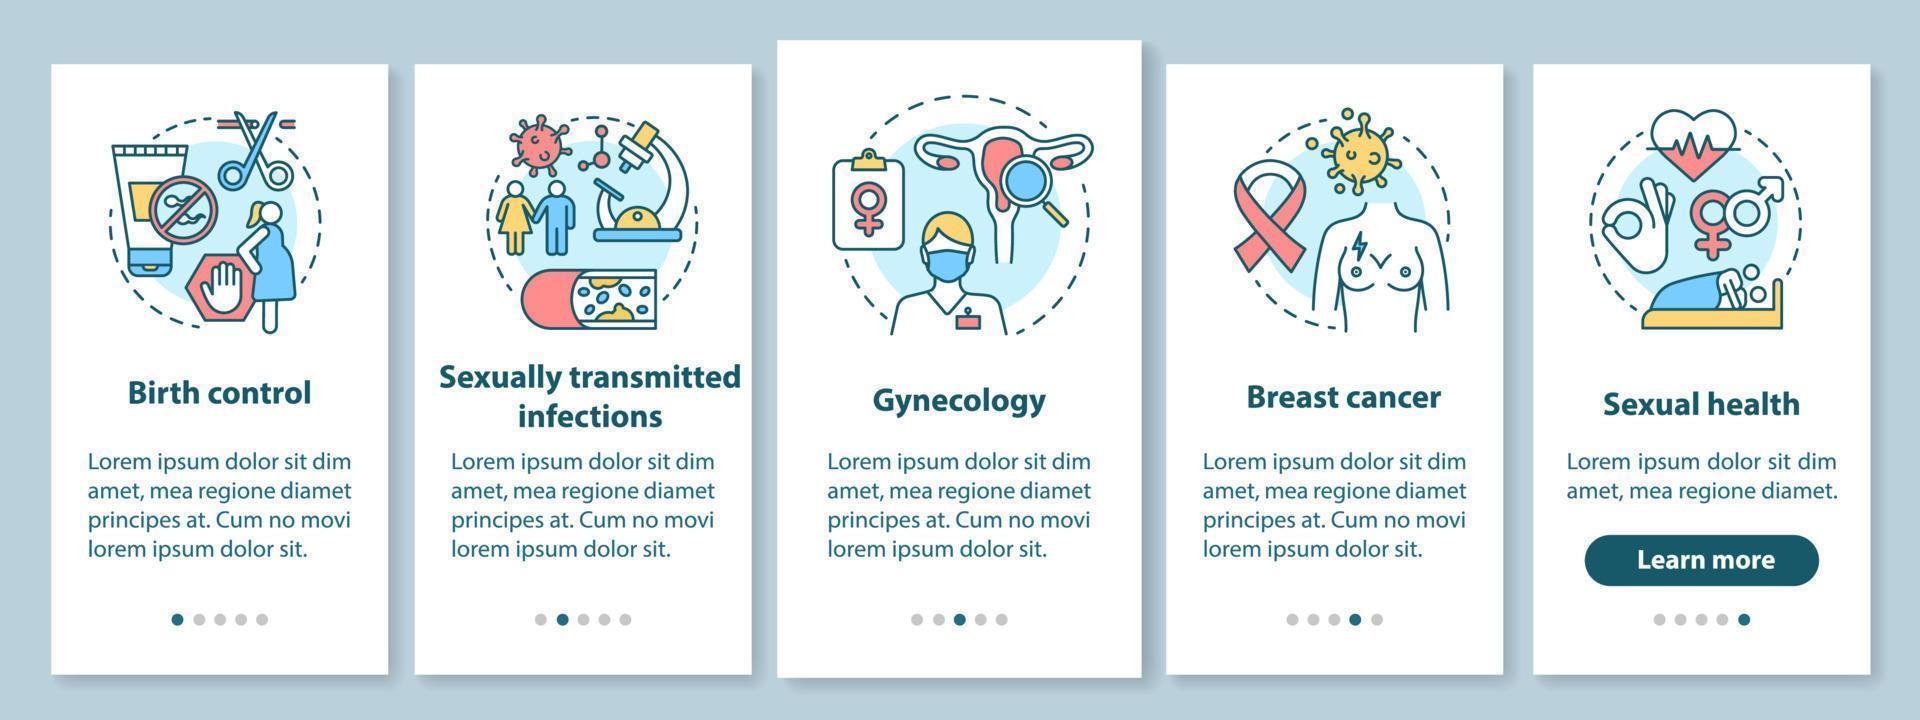 Women healthcare onboarding mobile app page screen with linear concepts. Birth control, breast cancer, sexual health. Walkthrough steps graphic instructions. UX, UI, GUI template with illustrations vector